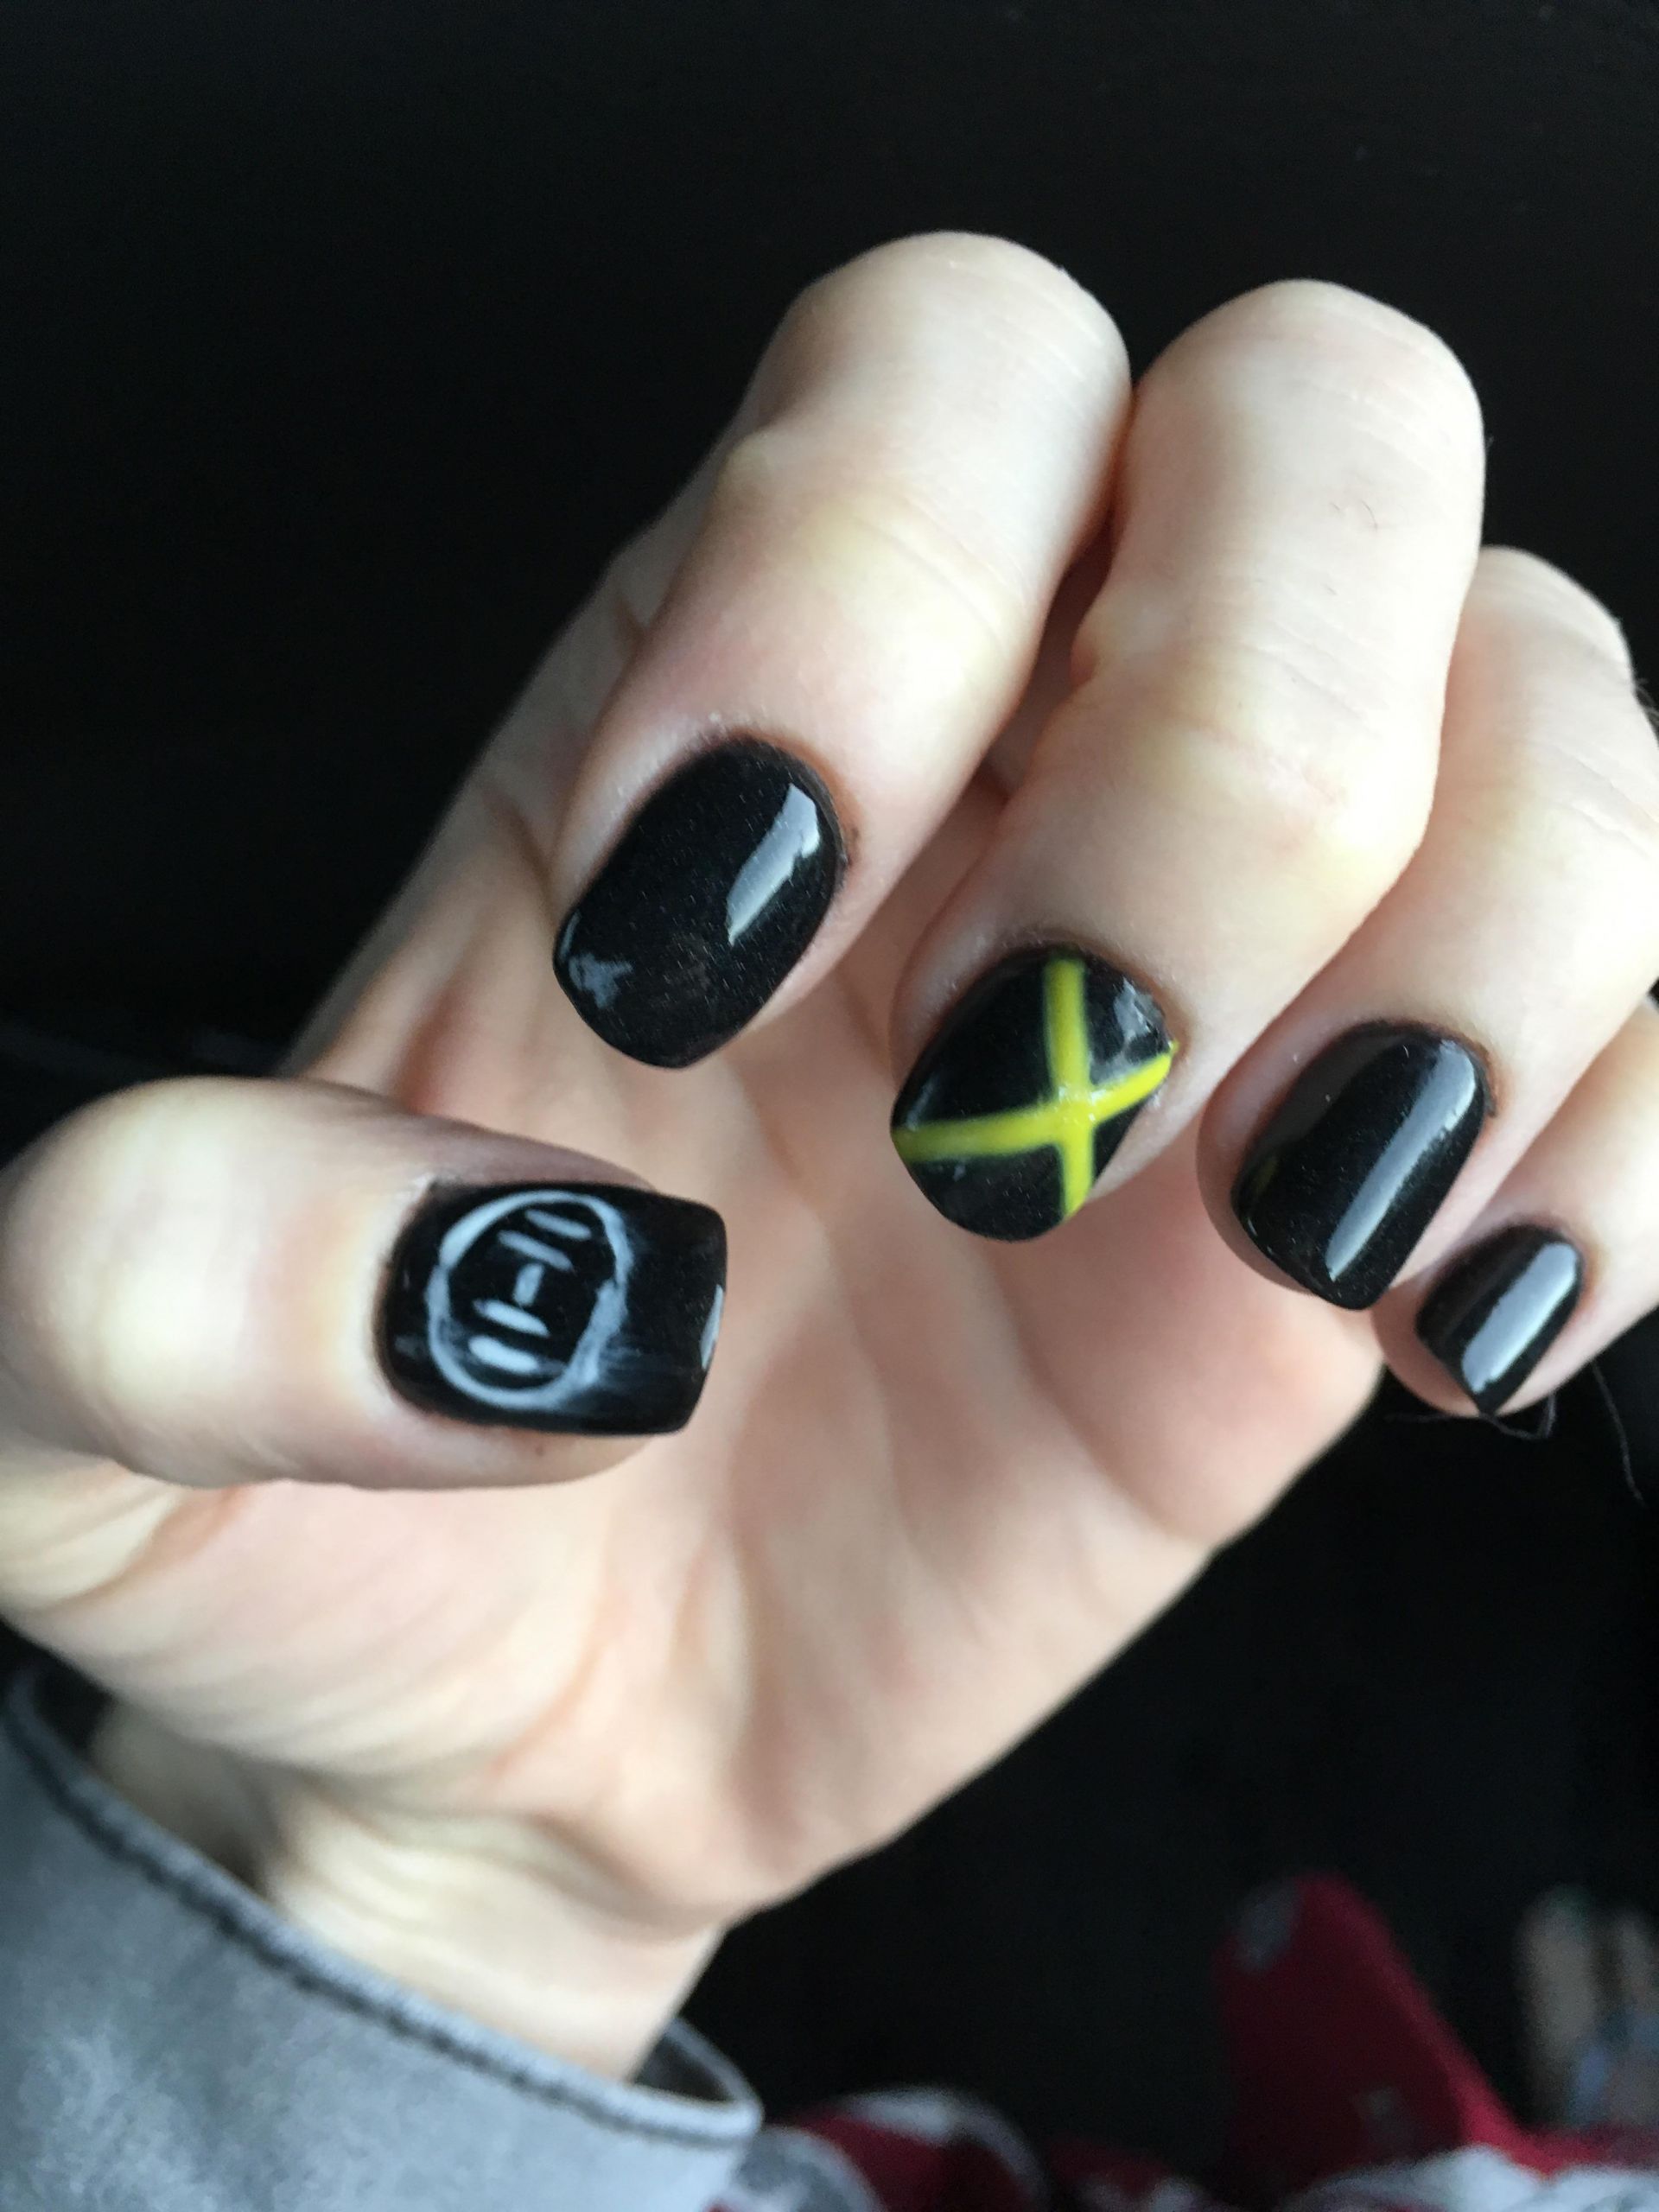 Beautiful Nails Memphis Tn
 I’m ting psyched for the concert in Memphis this week